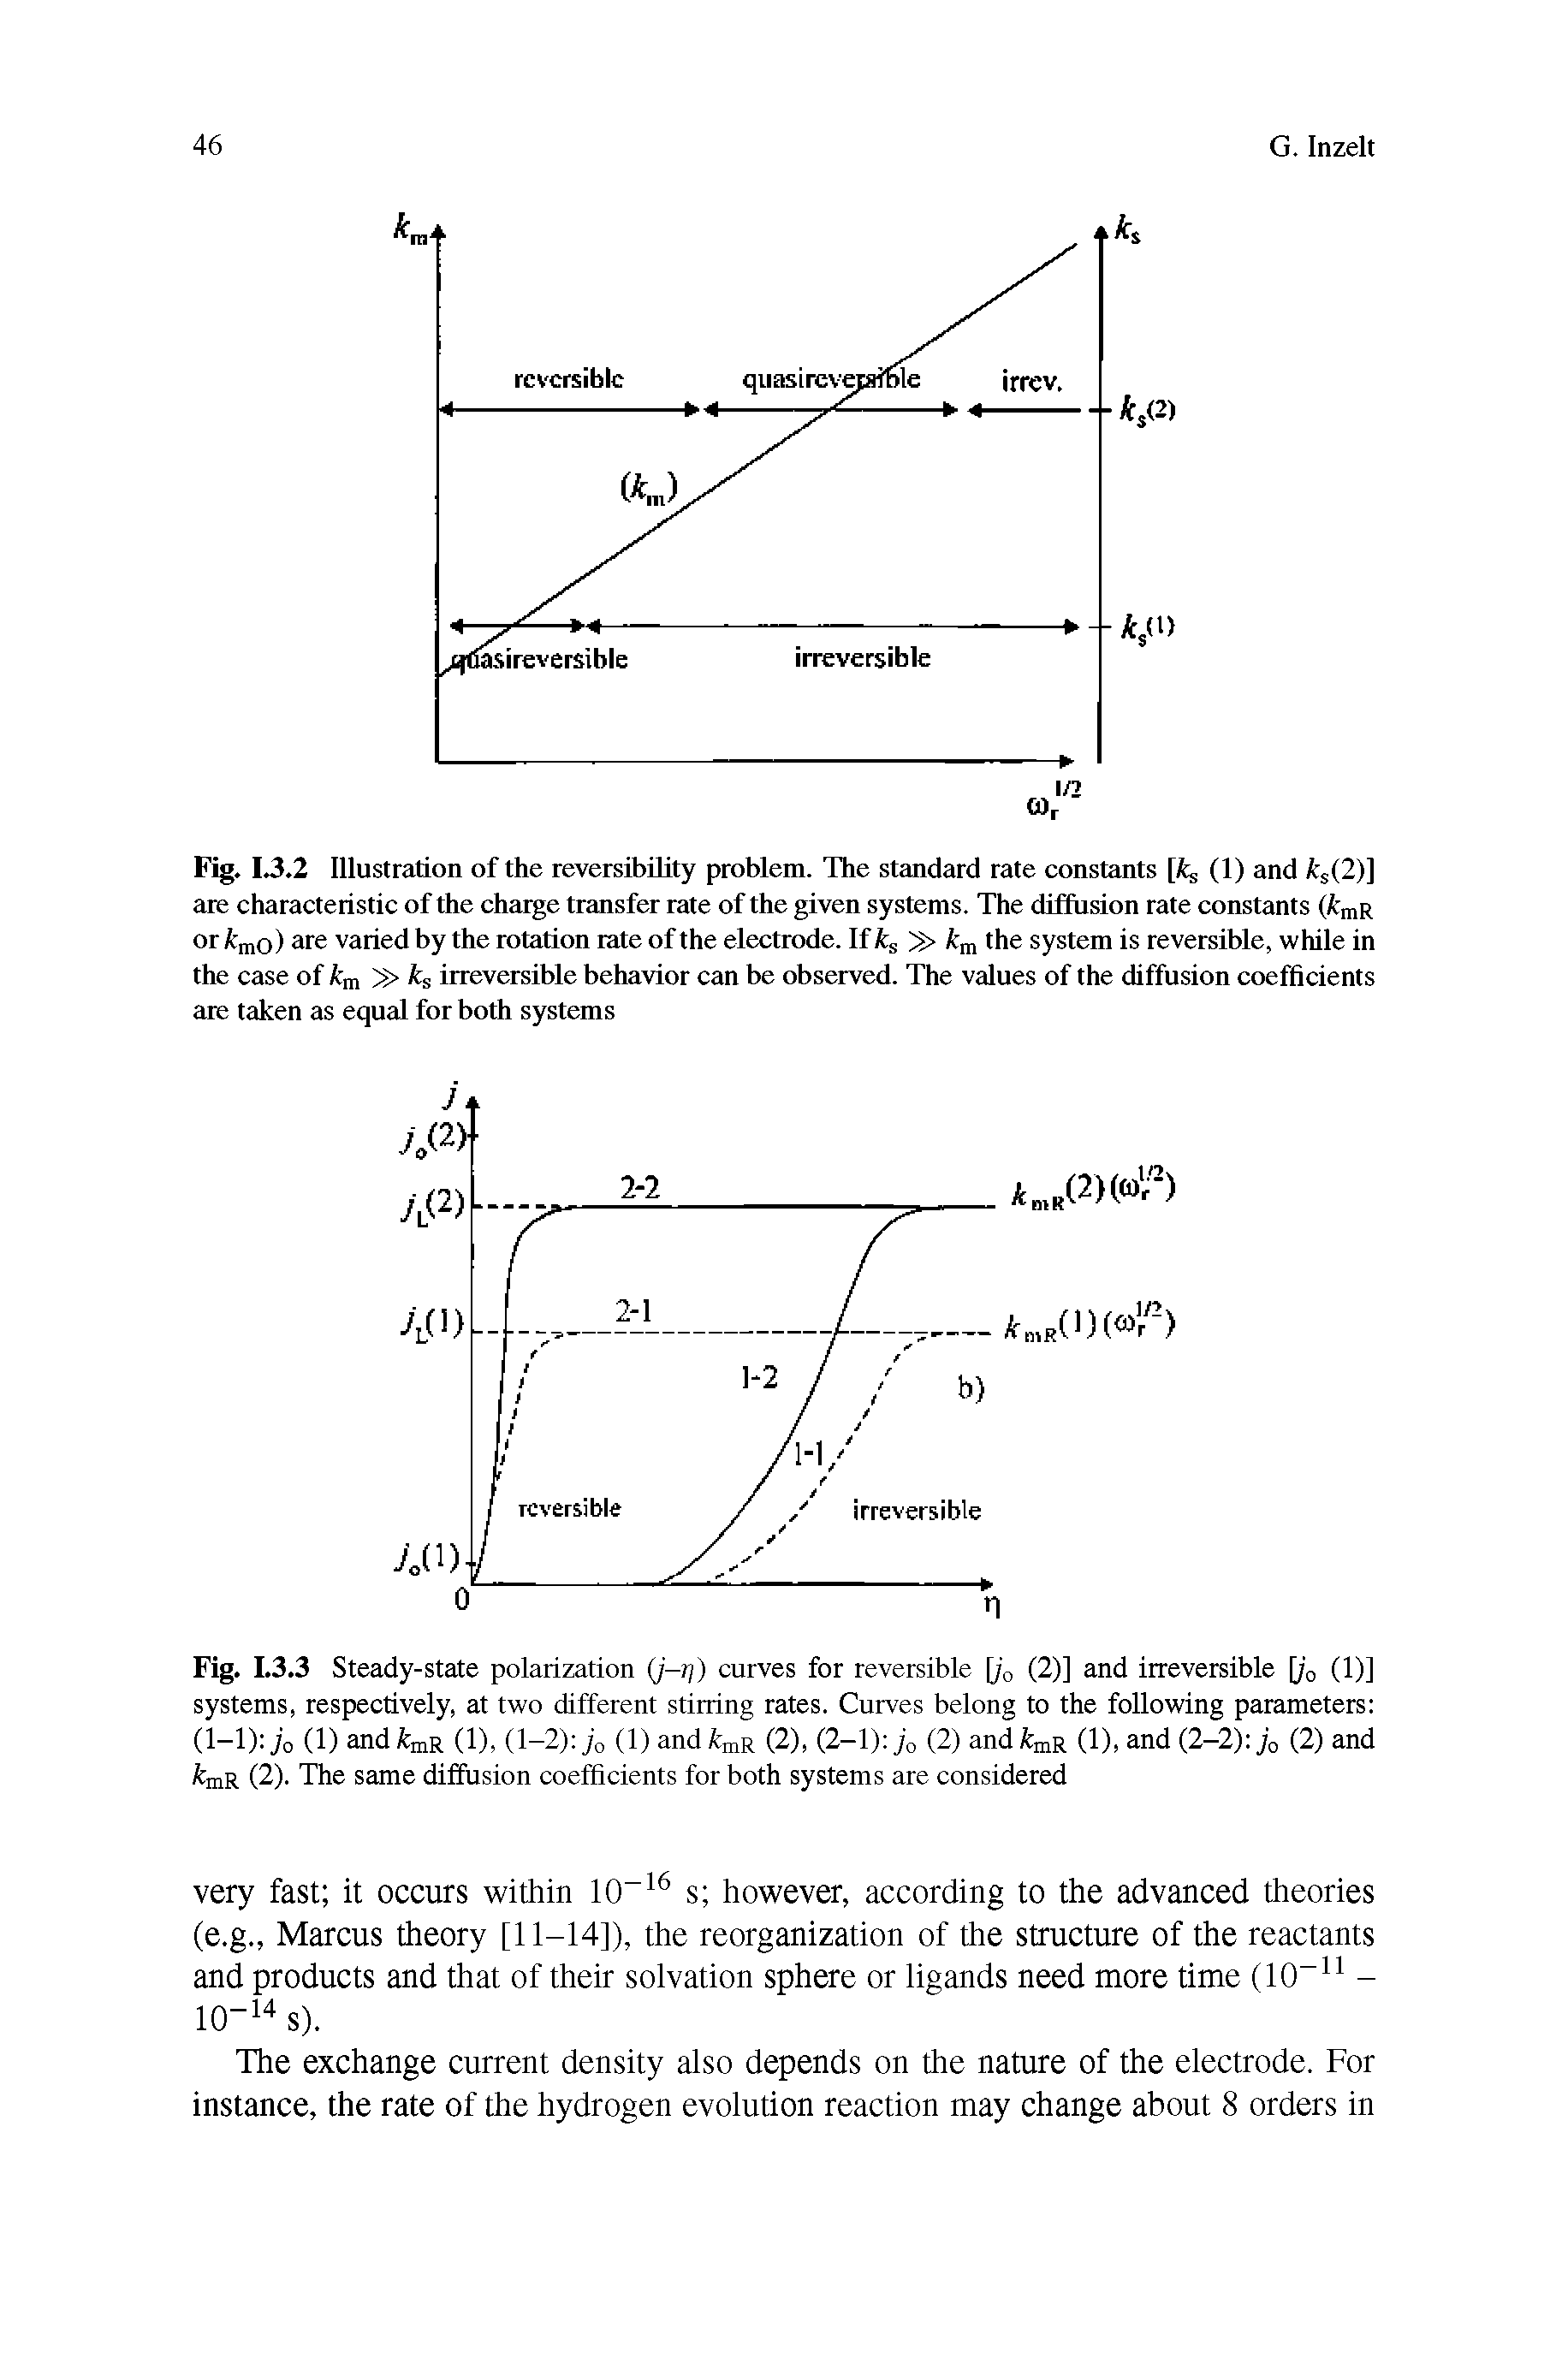 Fig. IJ.2 Illustration of the reversibility problem. The standard rate constants (1) and s(2)] are characteristic of the chaige transfer rate of the given systems. The diffusion rate constants ( mR or krao) ars varied by the rotation rate of the electrode. If kg g> the system is reversible, while in the case of ks irreversible behavior can be observed. The values of the diffusion coefficients are taken as equal for both systems...